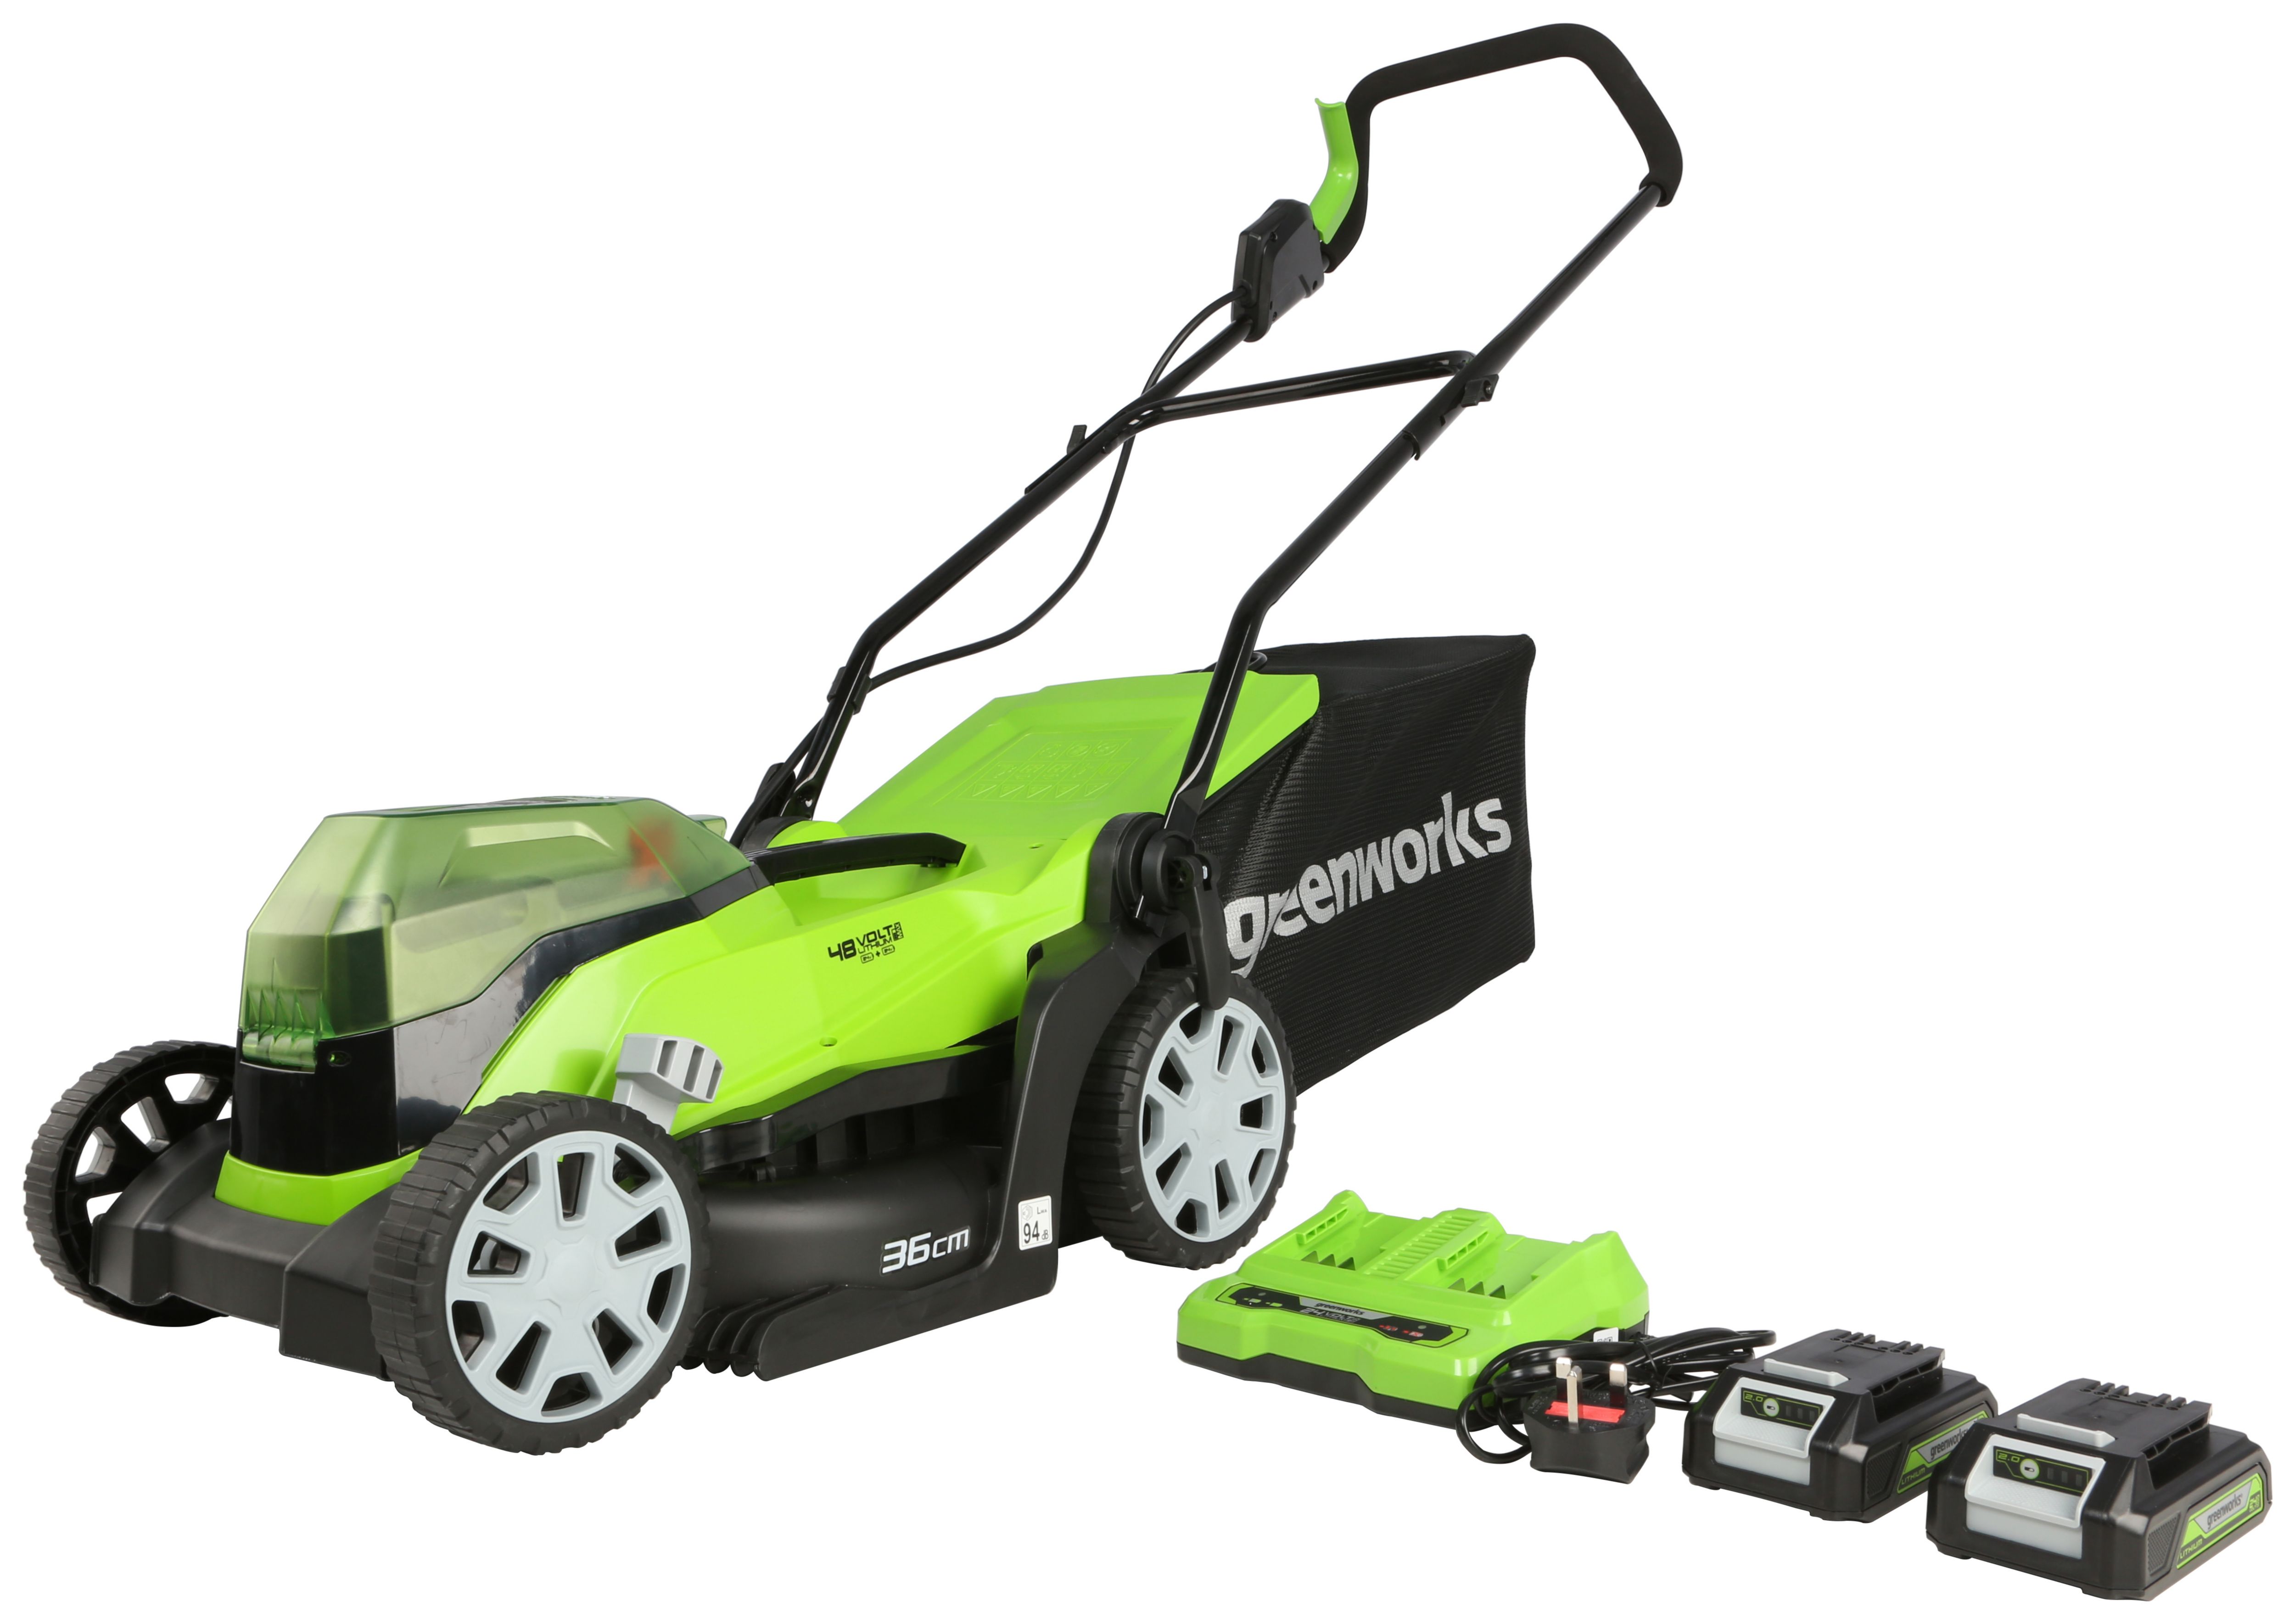 Image of Greenworks Cordless Lawn Mower 48V with 2 x 24V 2Ah Batteries & Charger - 36cm